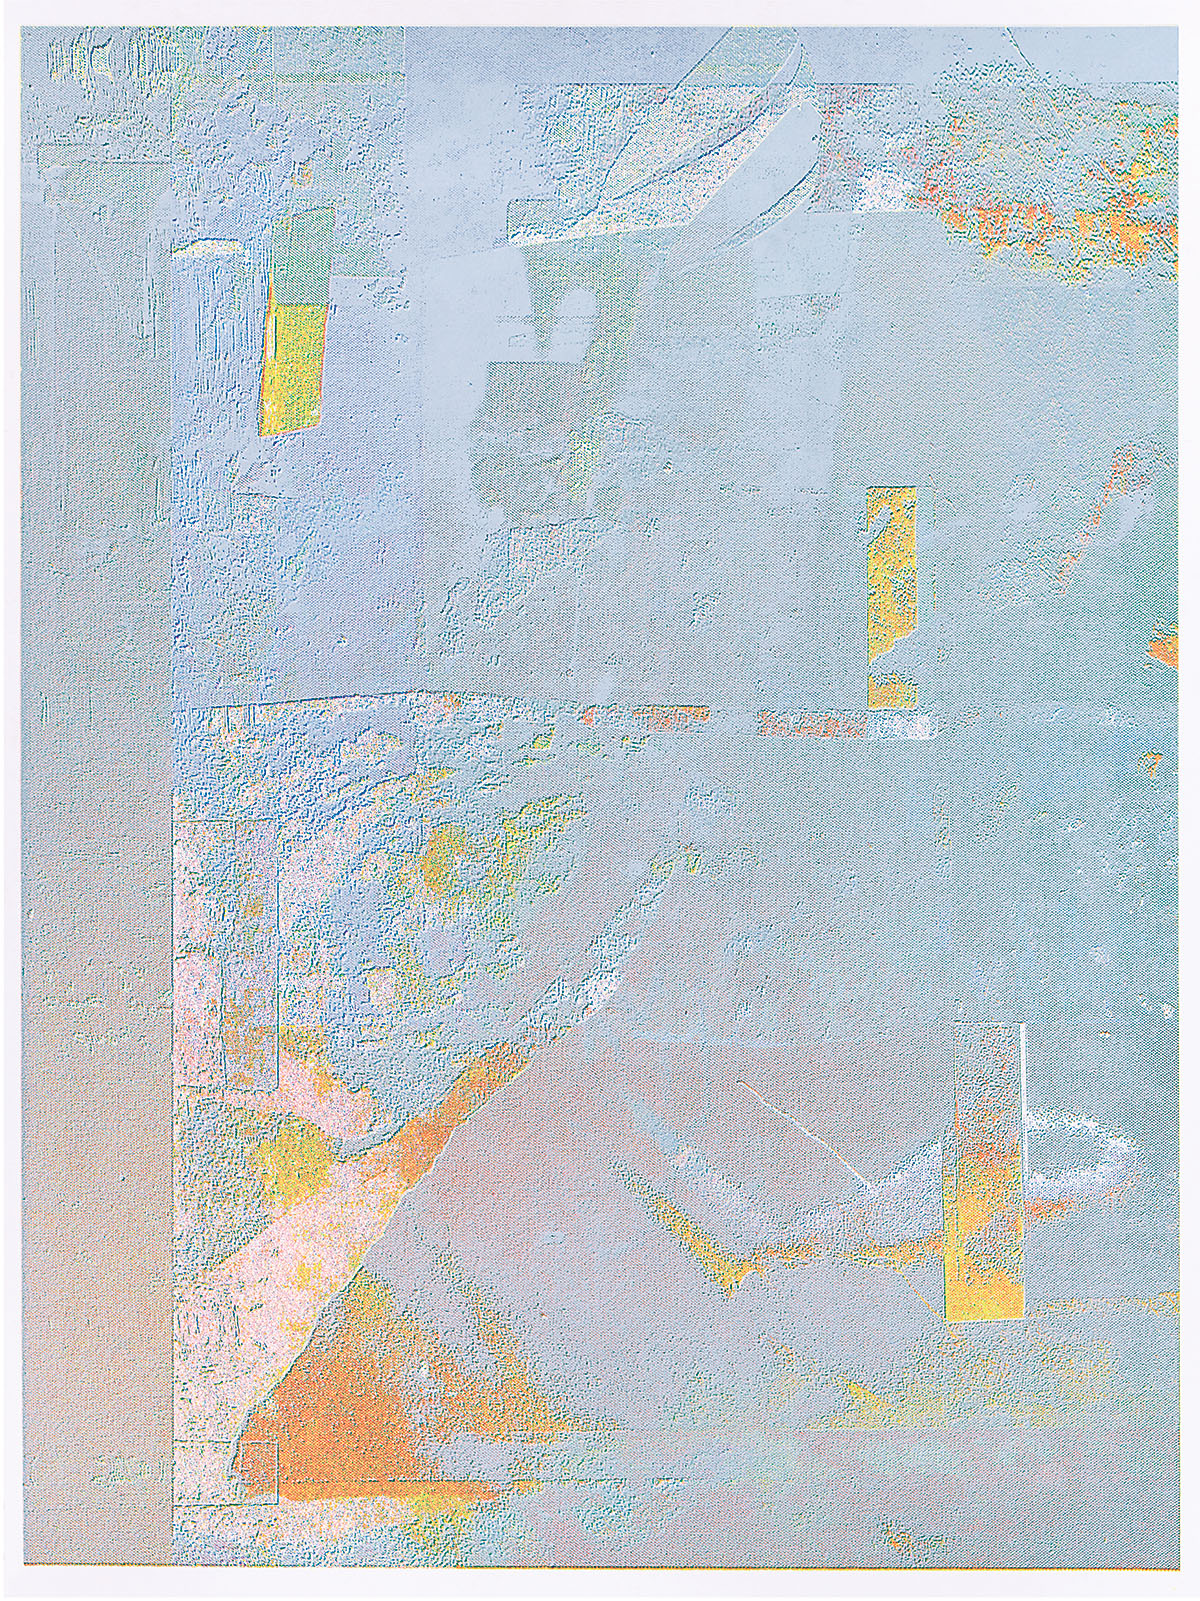 <p>Edge Definition<br />
by Sonnenzimmer<br />
2021<br />
5-color screen print<br />
18 × 24 inches<br />
edition of 34<br />
—<br />
ID: This primarily gray-blue image<br />
replicates a heavily worn surface. There<br />
is no clear focal point, only spikes of<br />
yellow and orange that emerge from<br />
beneath the primarily gray-blue<br />
foreground.</p>